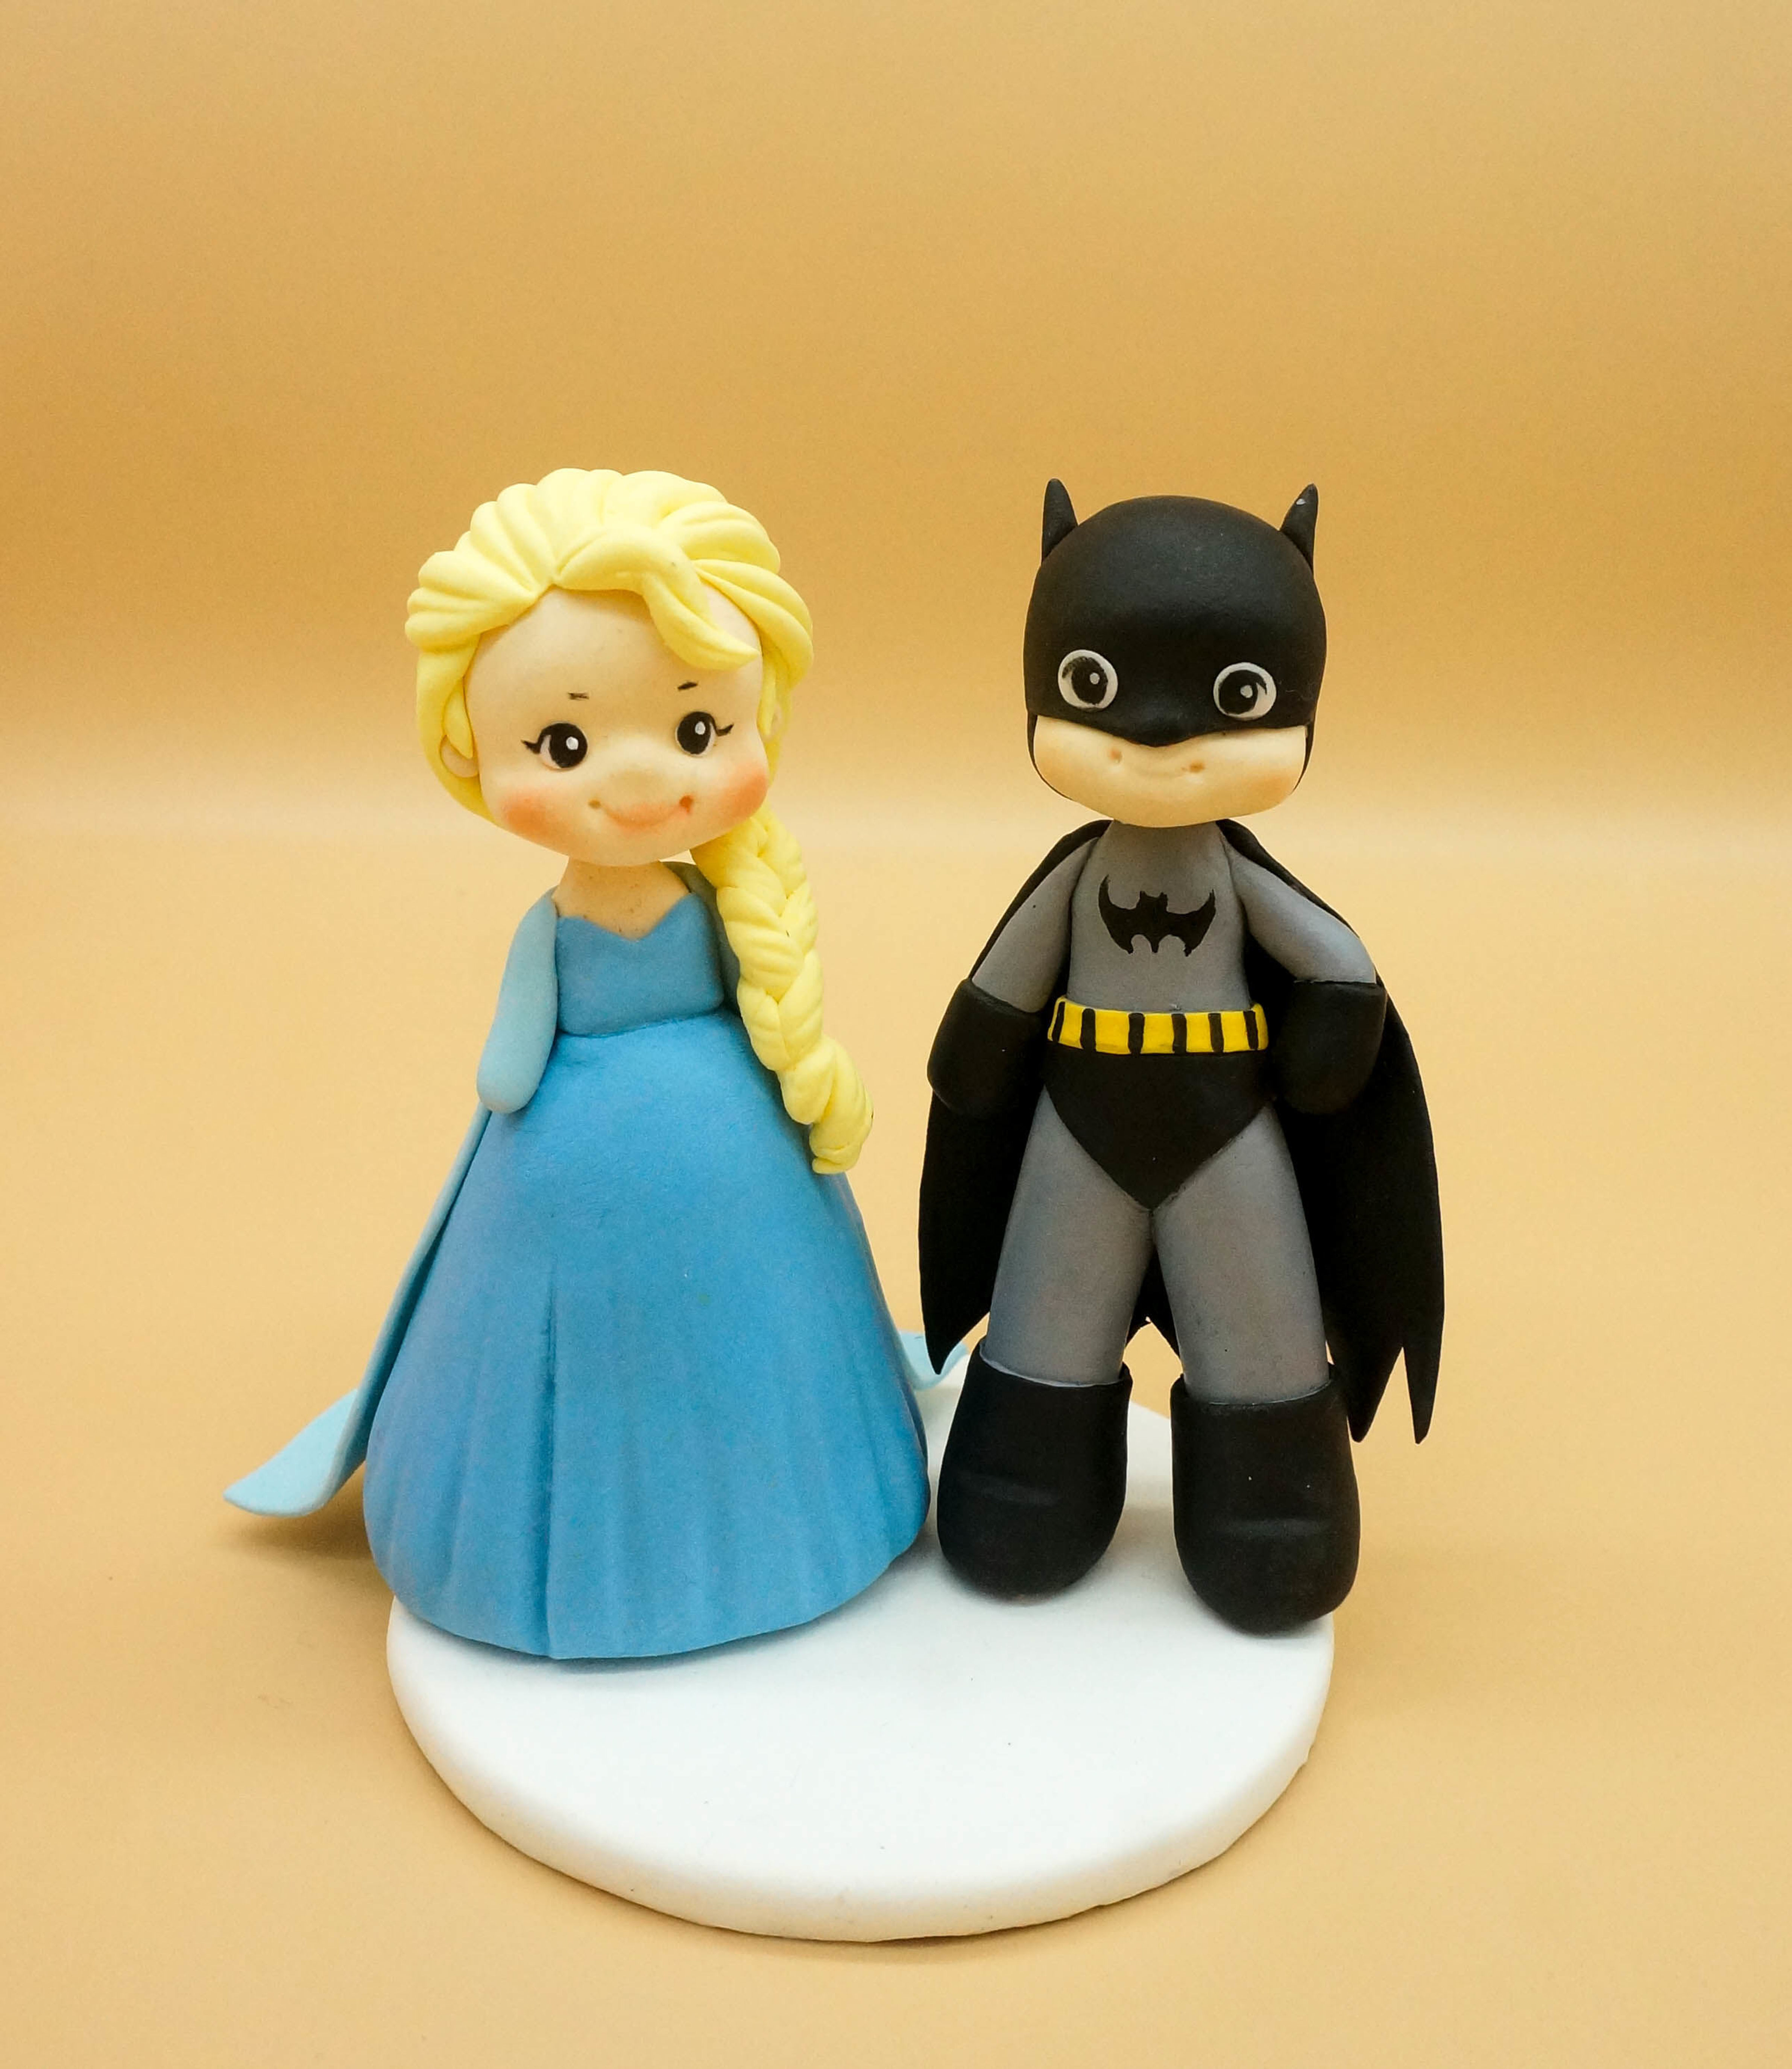 Picture of Personalized wedding cake topper, Elsa and Batman Wedding Cake Topper